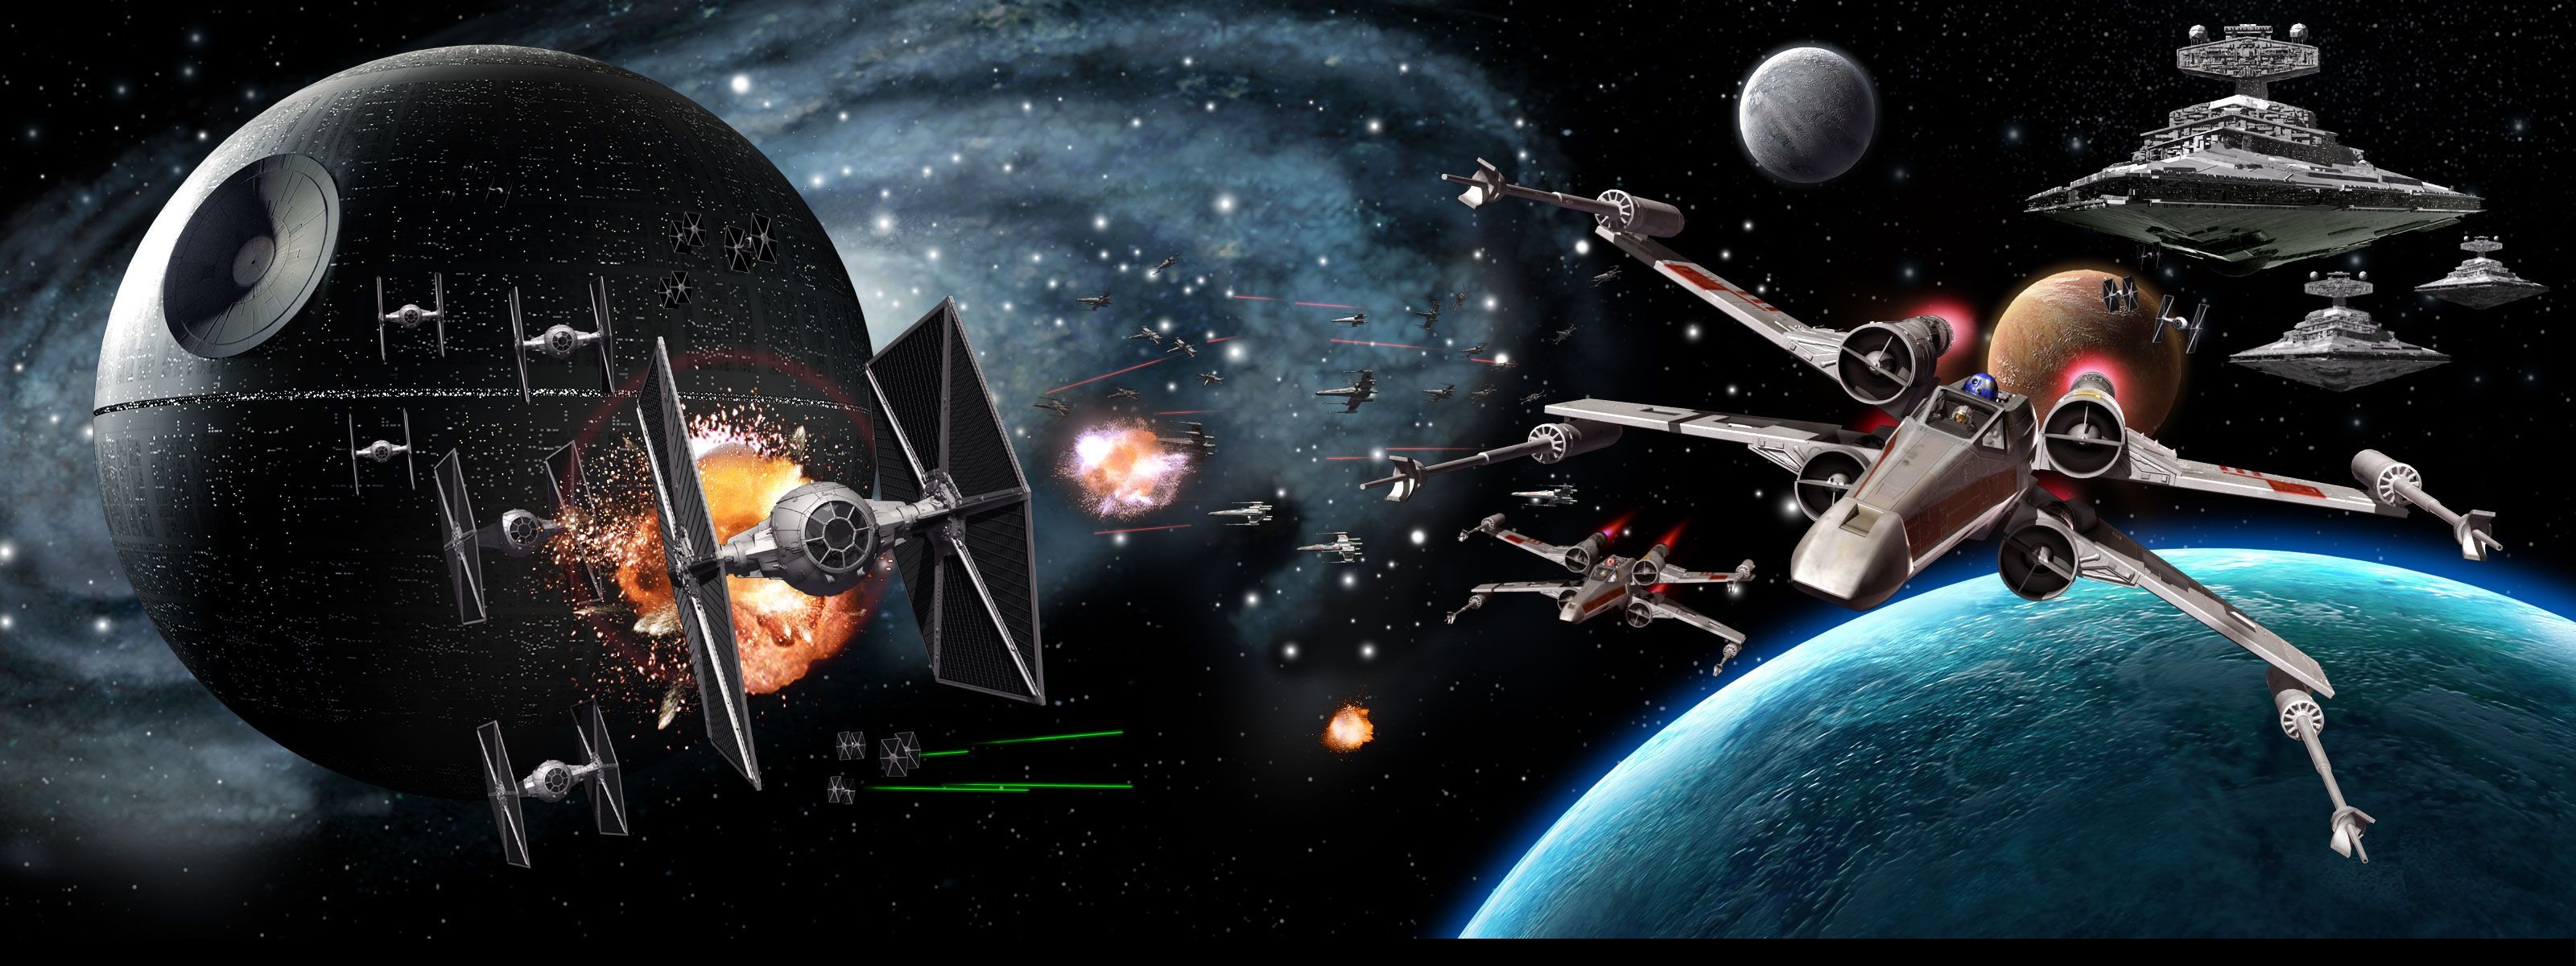 3200x1200 Star wars Multi Monitor sci fi science battle death star outer space  vehicles spaceships spacecrafts wallpaper |  | 32080 | WallpaperUP